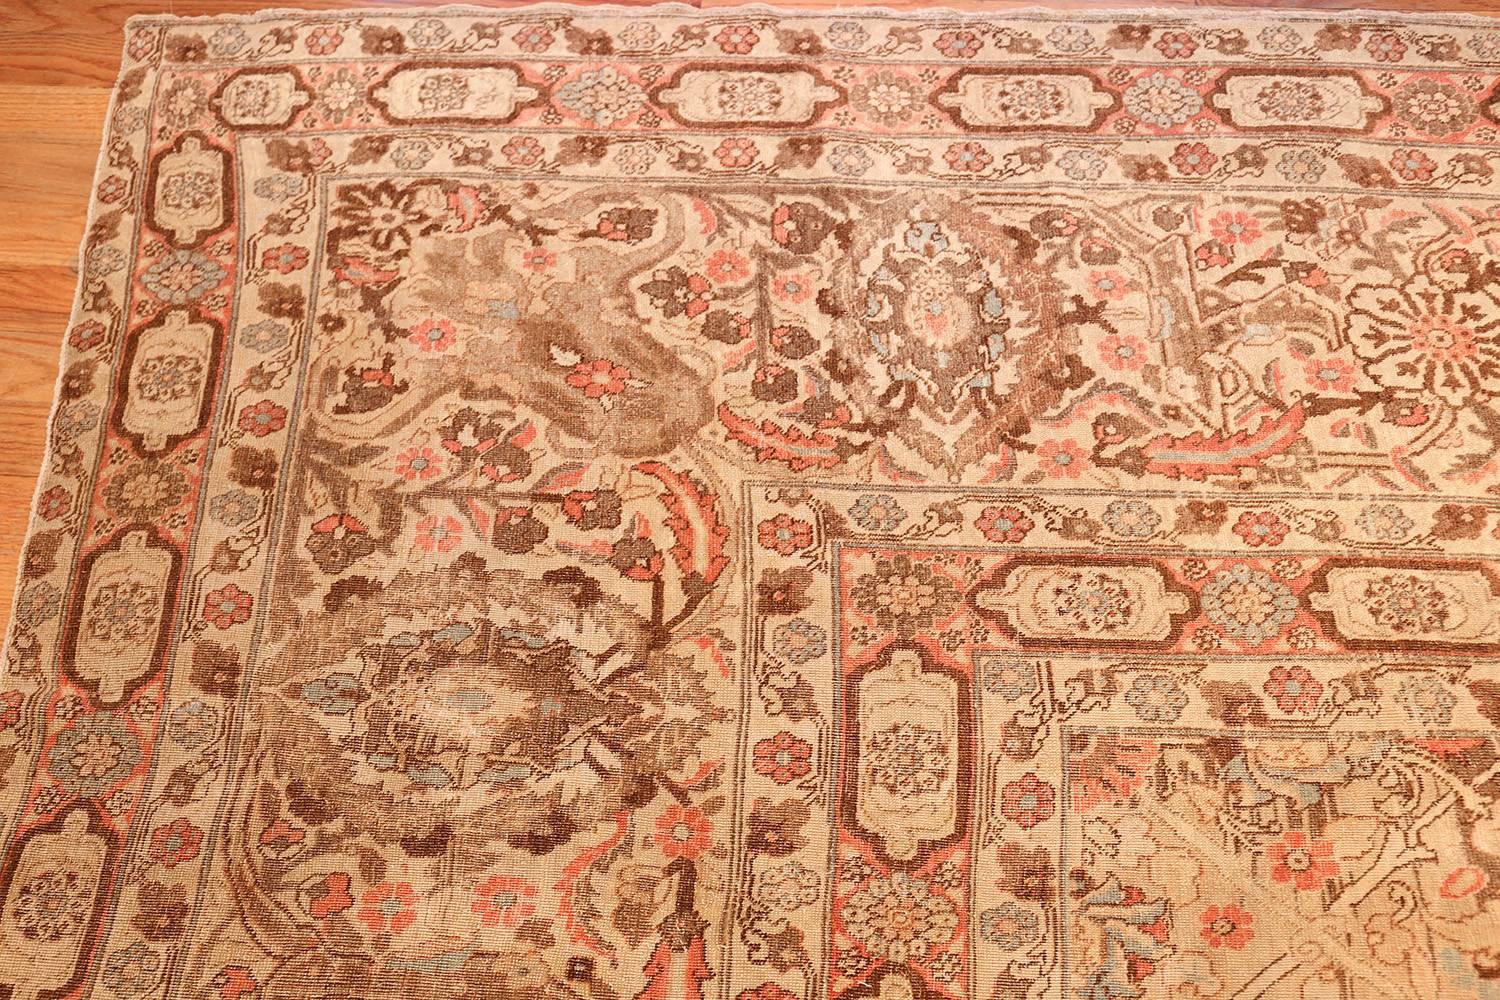 Antique Palace Size Tabriz Carpet, Country of Origin / Rug Type: Persian Rugs, Circa date: 1900. Size: 18 ft x 25 ft (5.49 m x 7.62 m)

Flowing petals and ferns create movement throughout this detailed Tabriz Carpet as they lead the viewer's eye